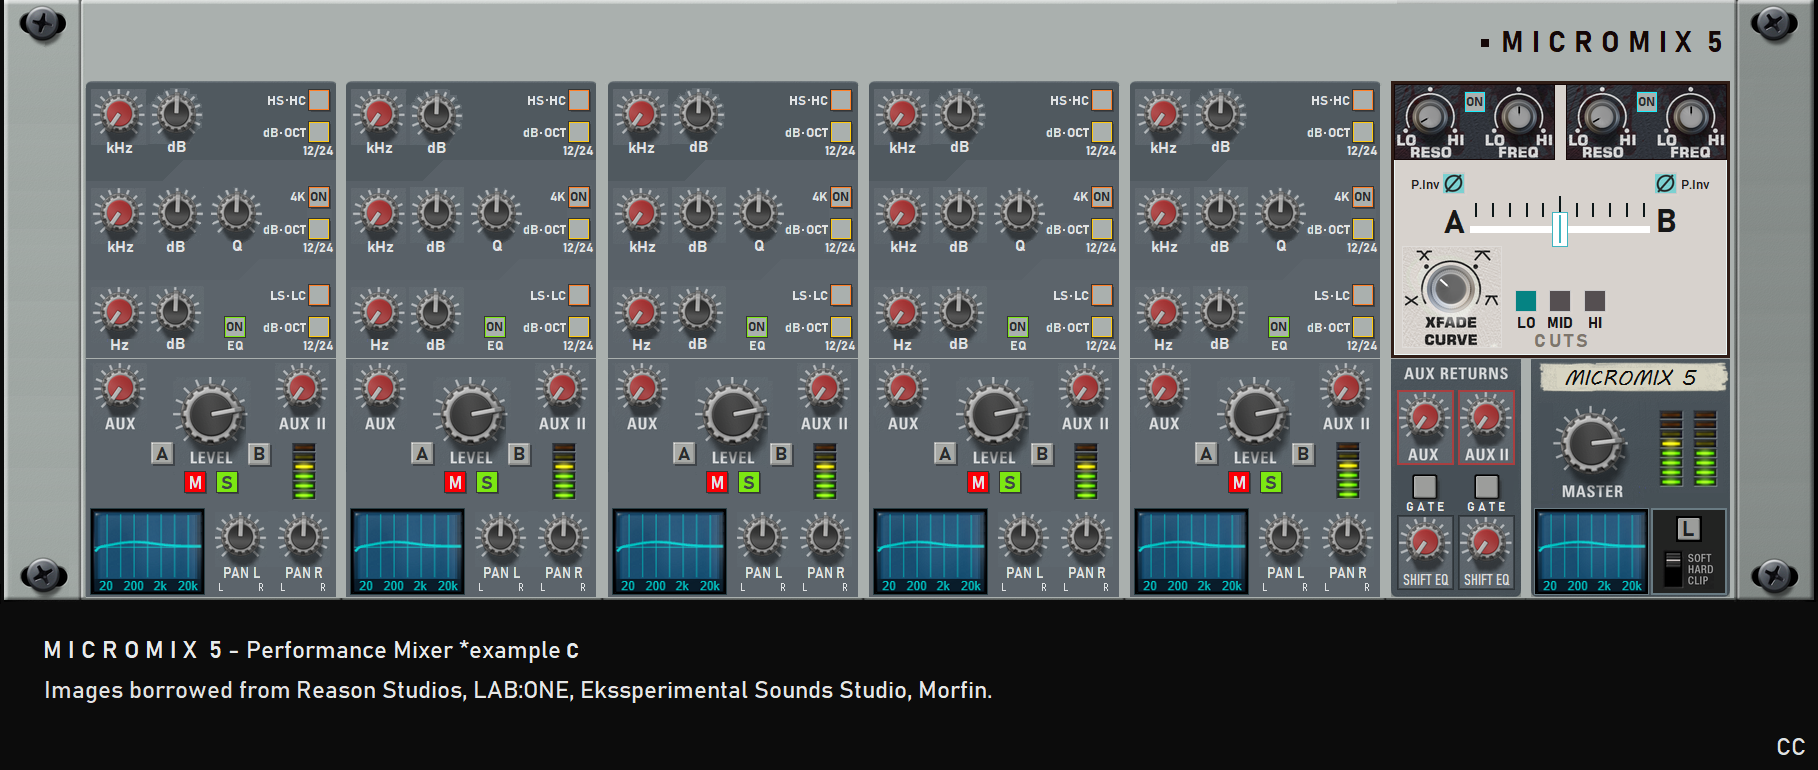 5 Channel Micromix AB crossfader C 2.png